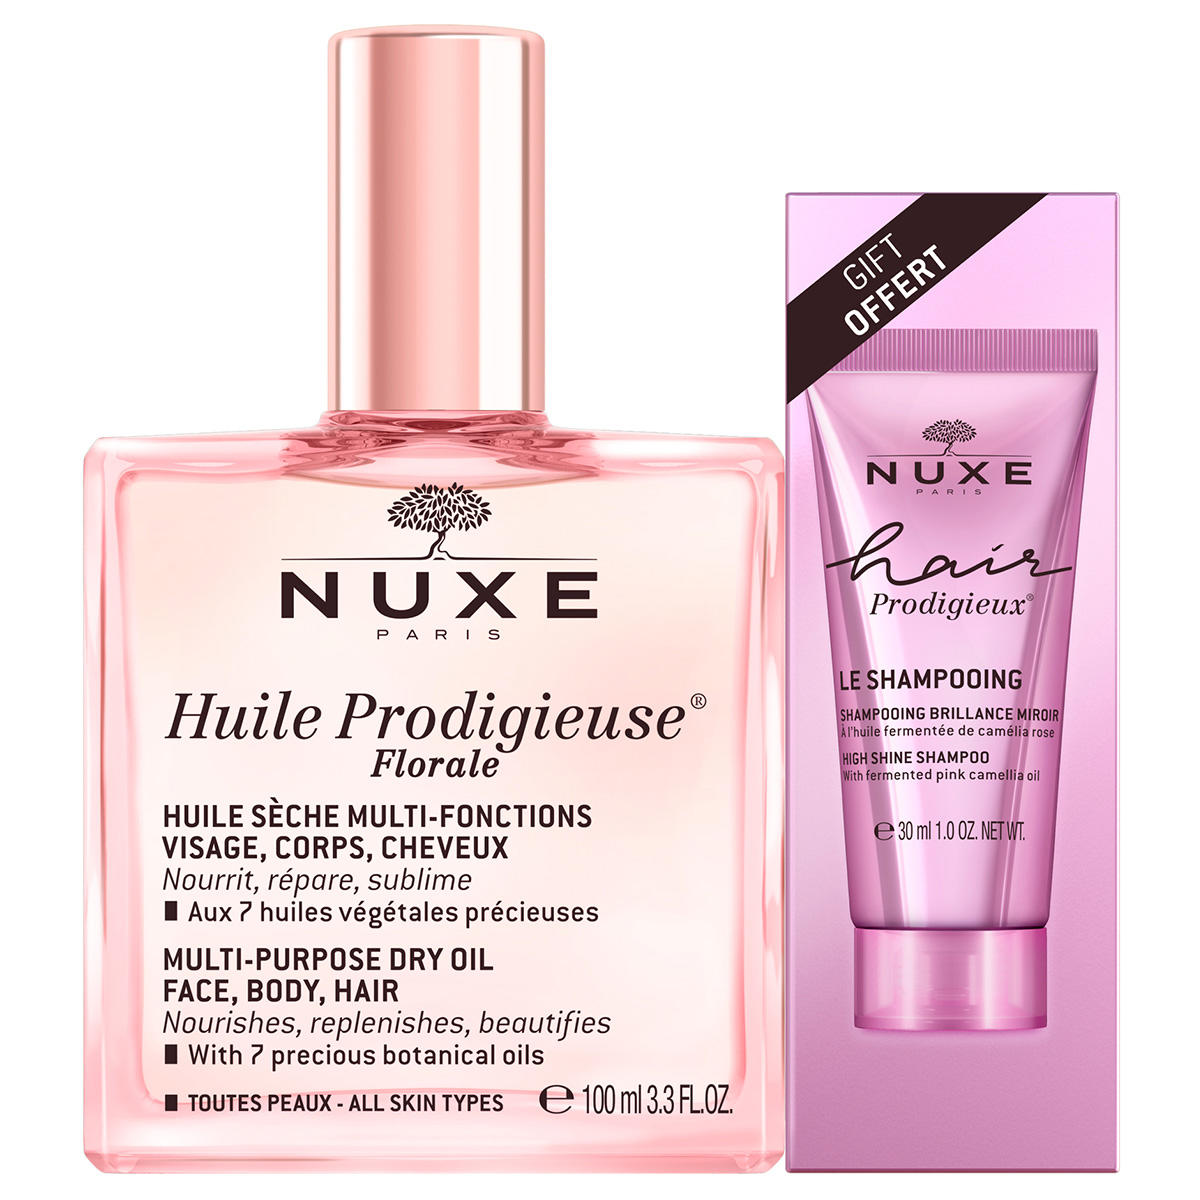 NUXE Huile Prodigieuse Floral Drying Oil + Shampoo Set  - 1